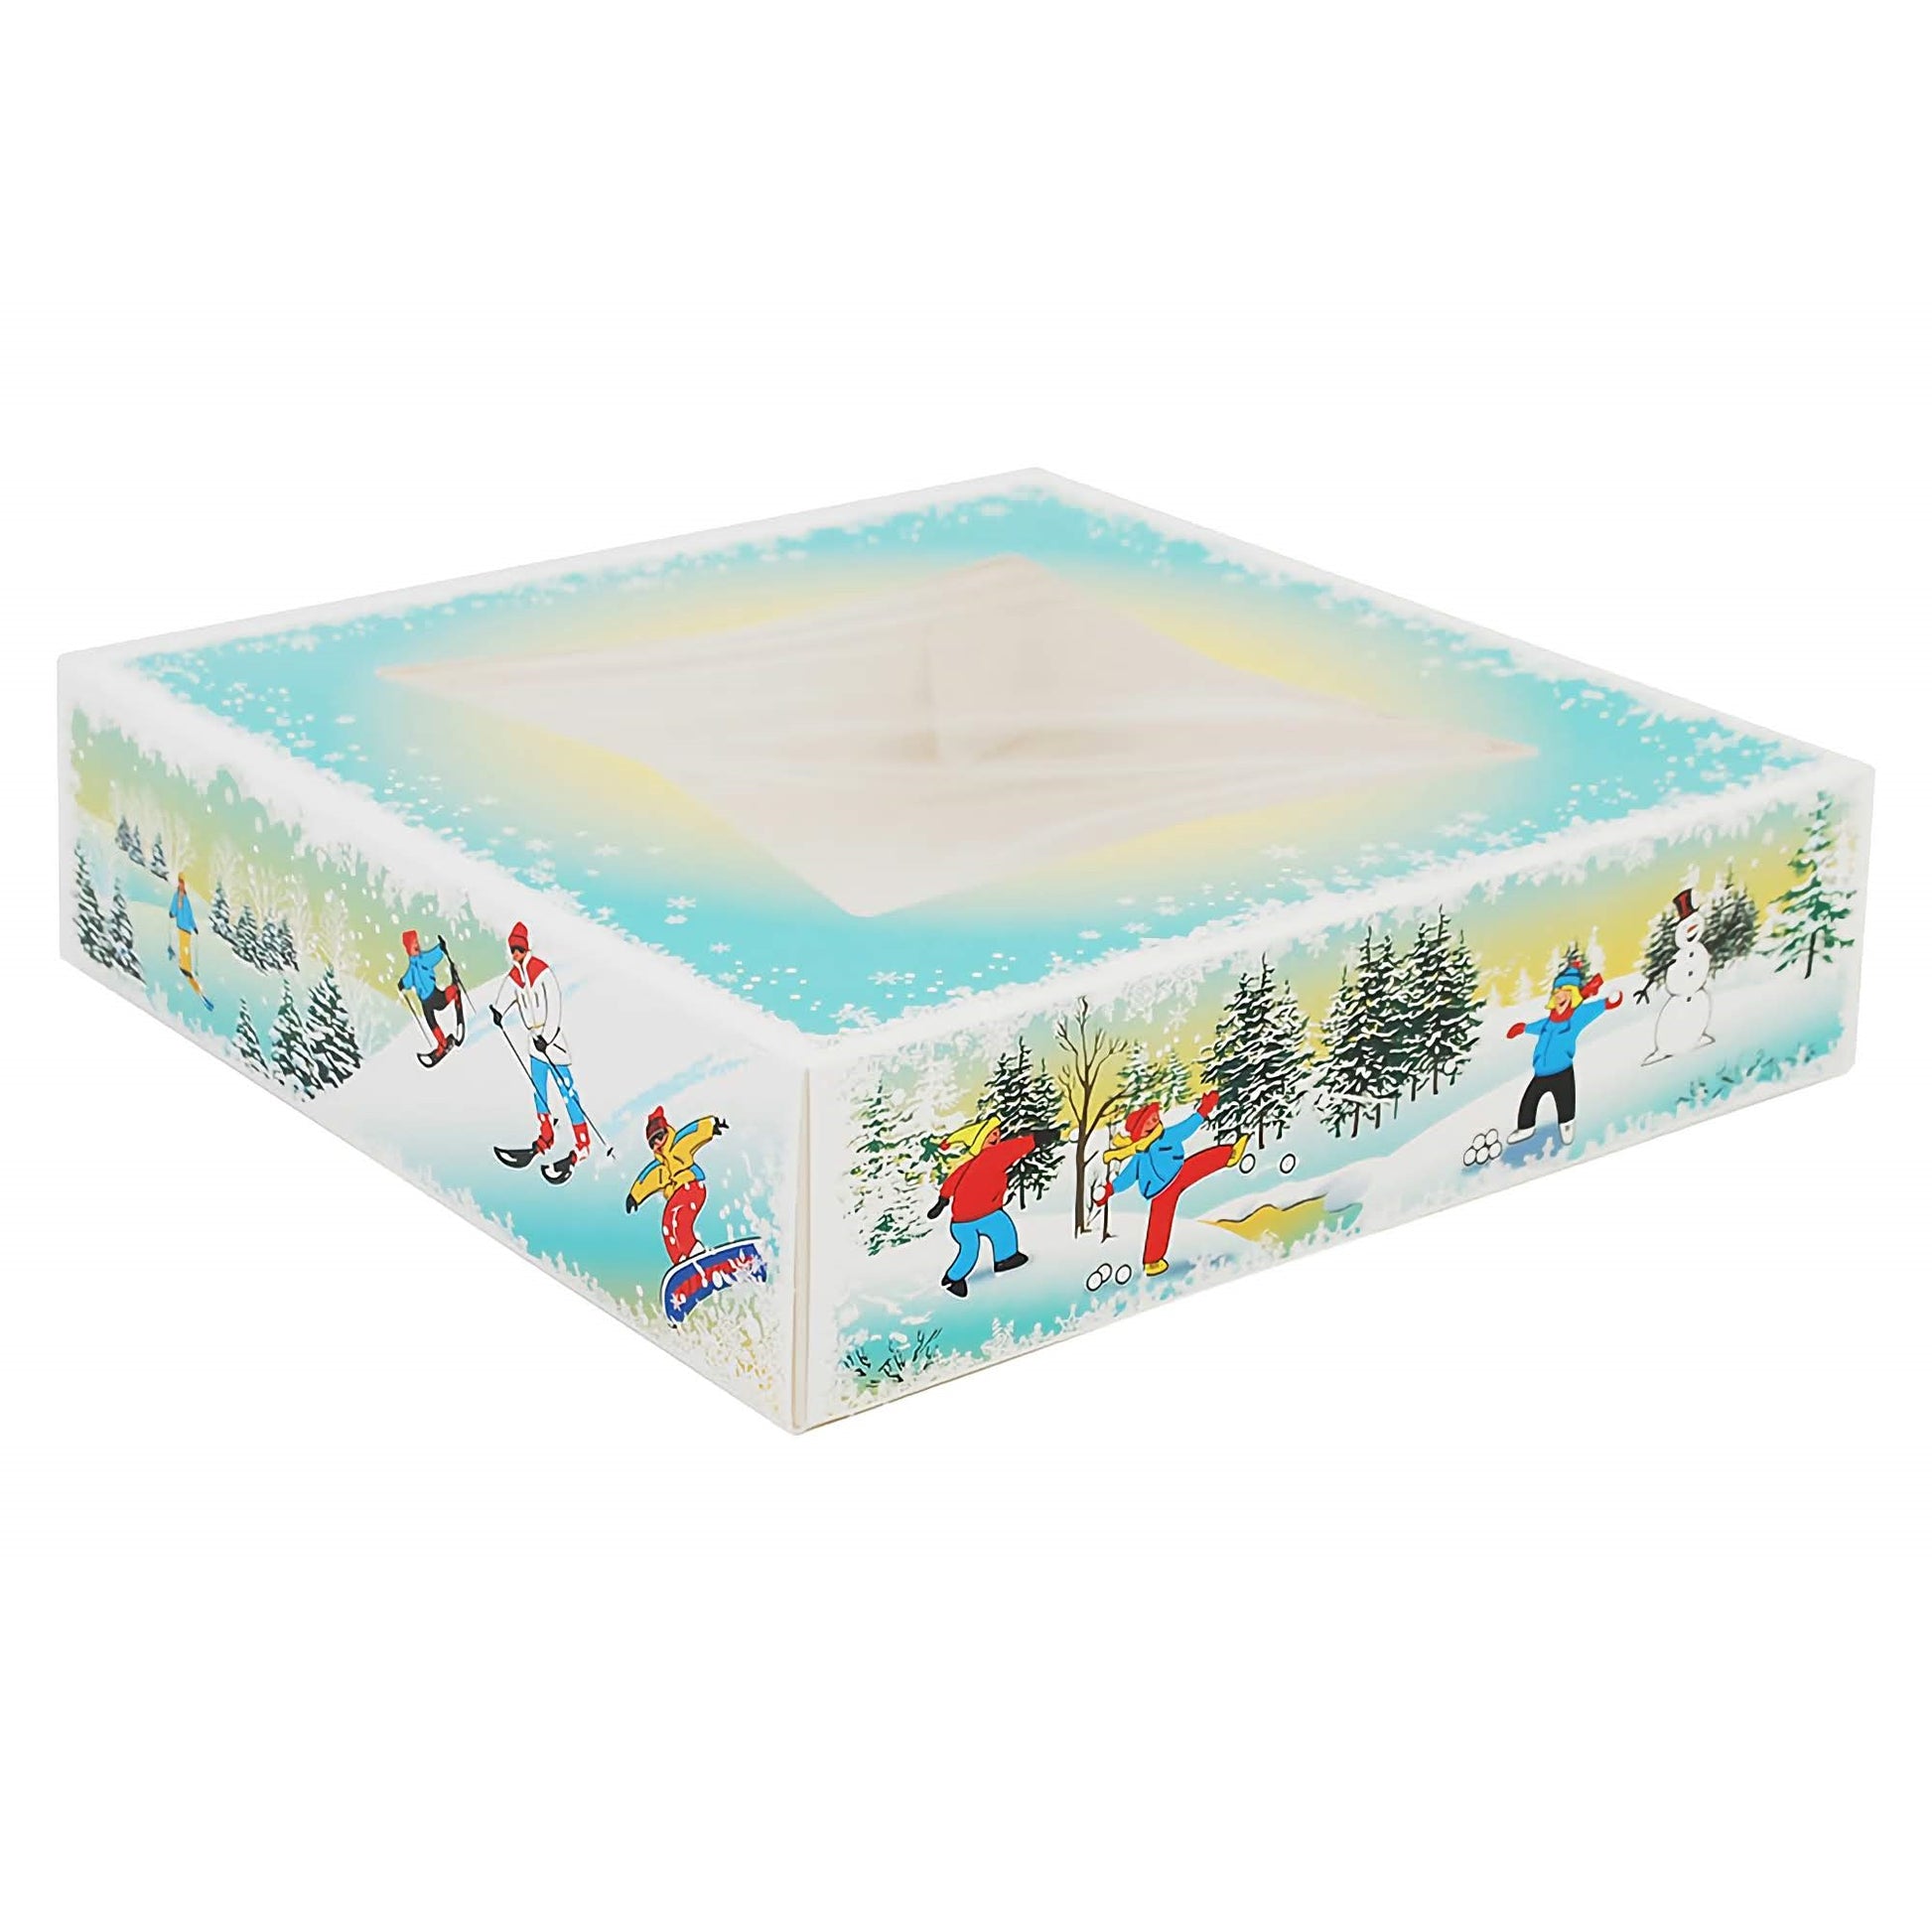 This image features a large Winter Wonderland candy box with a transparent window on the top. The sides of the box are adorned with a festive winter scene that includes people engaging in activities such as skiing and walking dogs, against a backdrop of snow-covered trees and falling snowflakes. The design evokes a cheerful holiday spirit and a sense of snowy adventure.